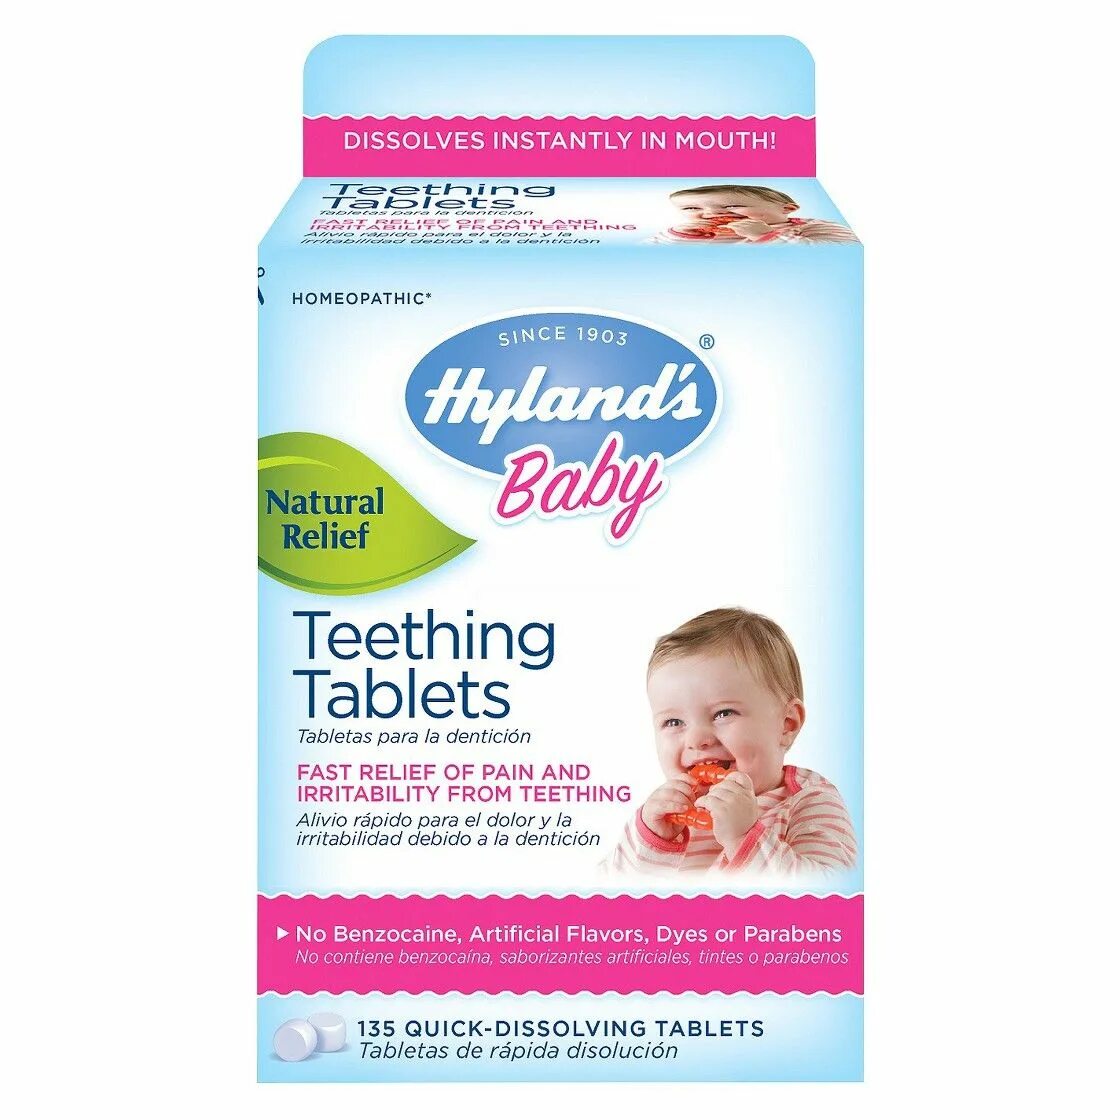 Natural babies. Hyland's Teething Tablets. Hylands Teething Tablet. Teething Gel Hylands. Hylands Baby.